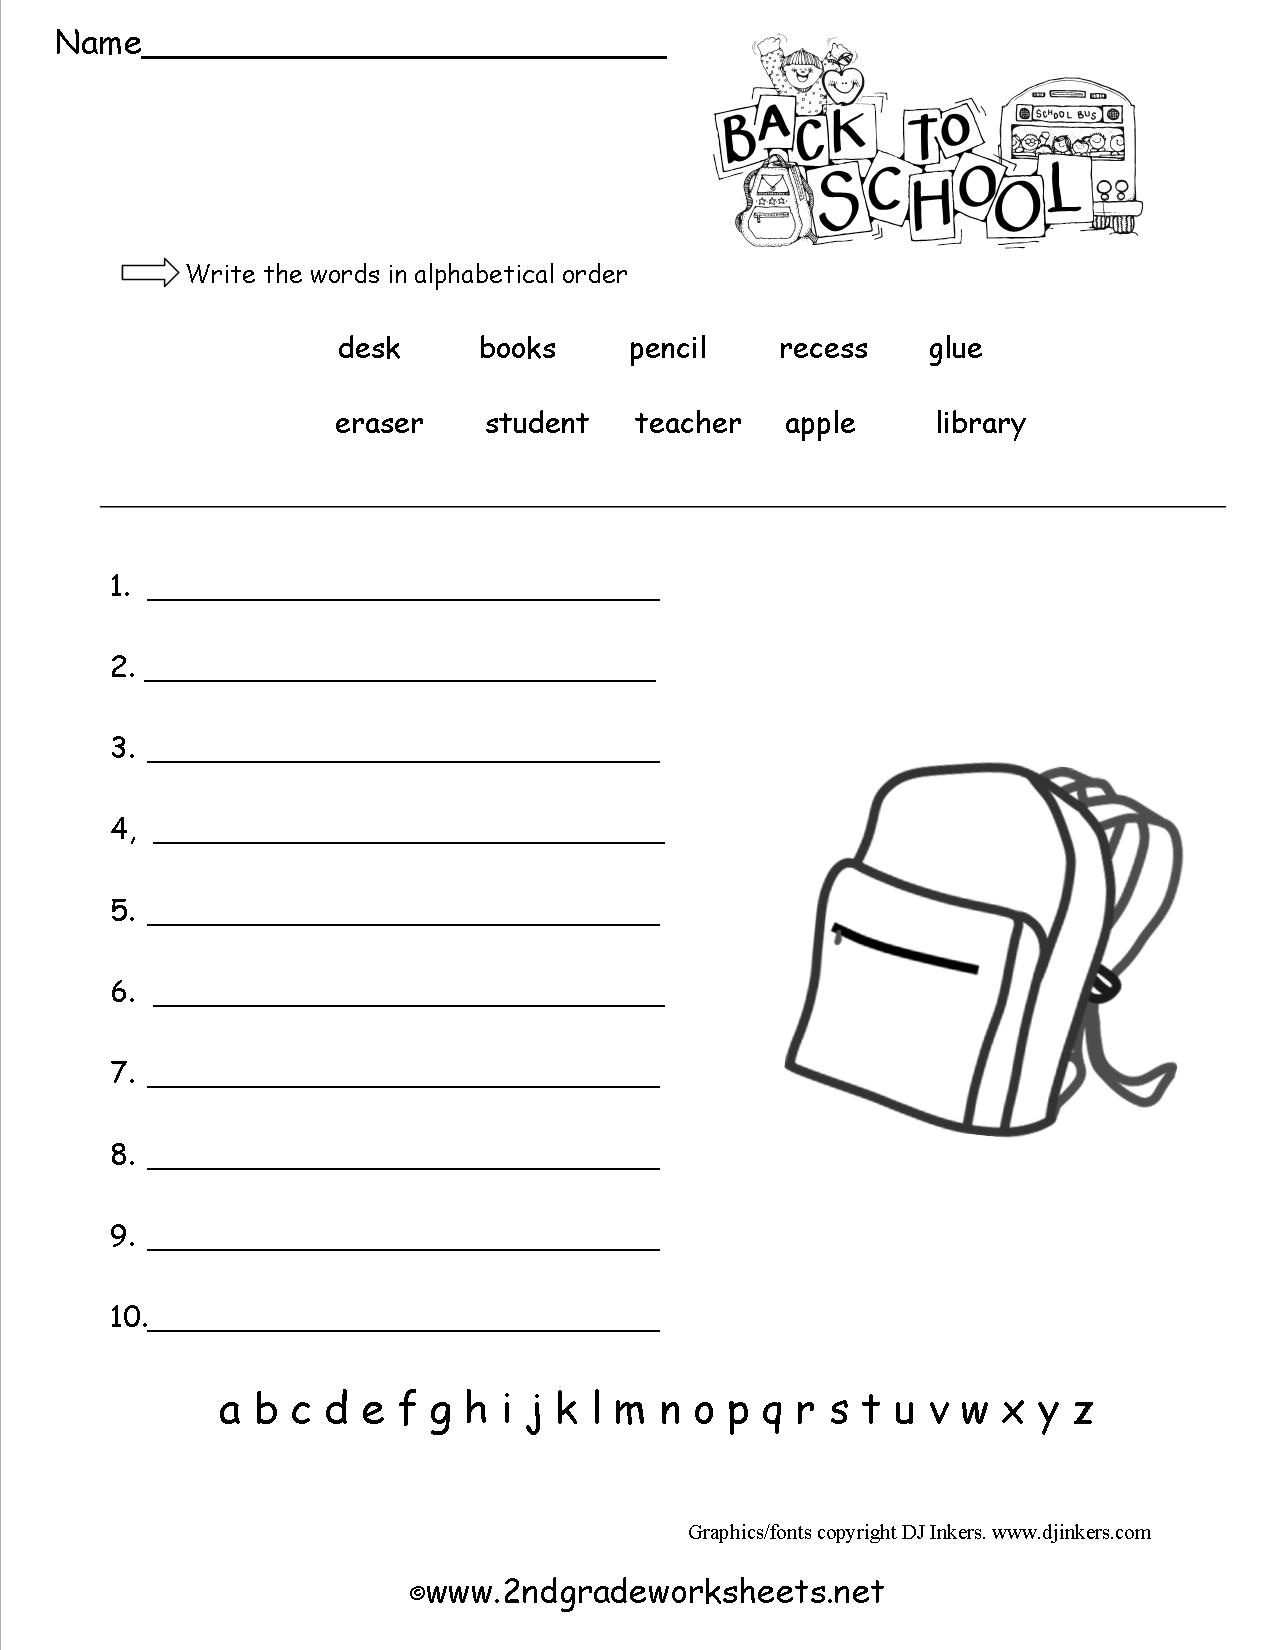 Free Back To School Worksheets And Printouts - Free Printable First Day Of School Activities